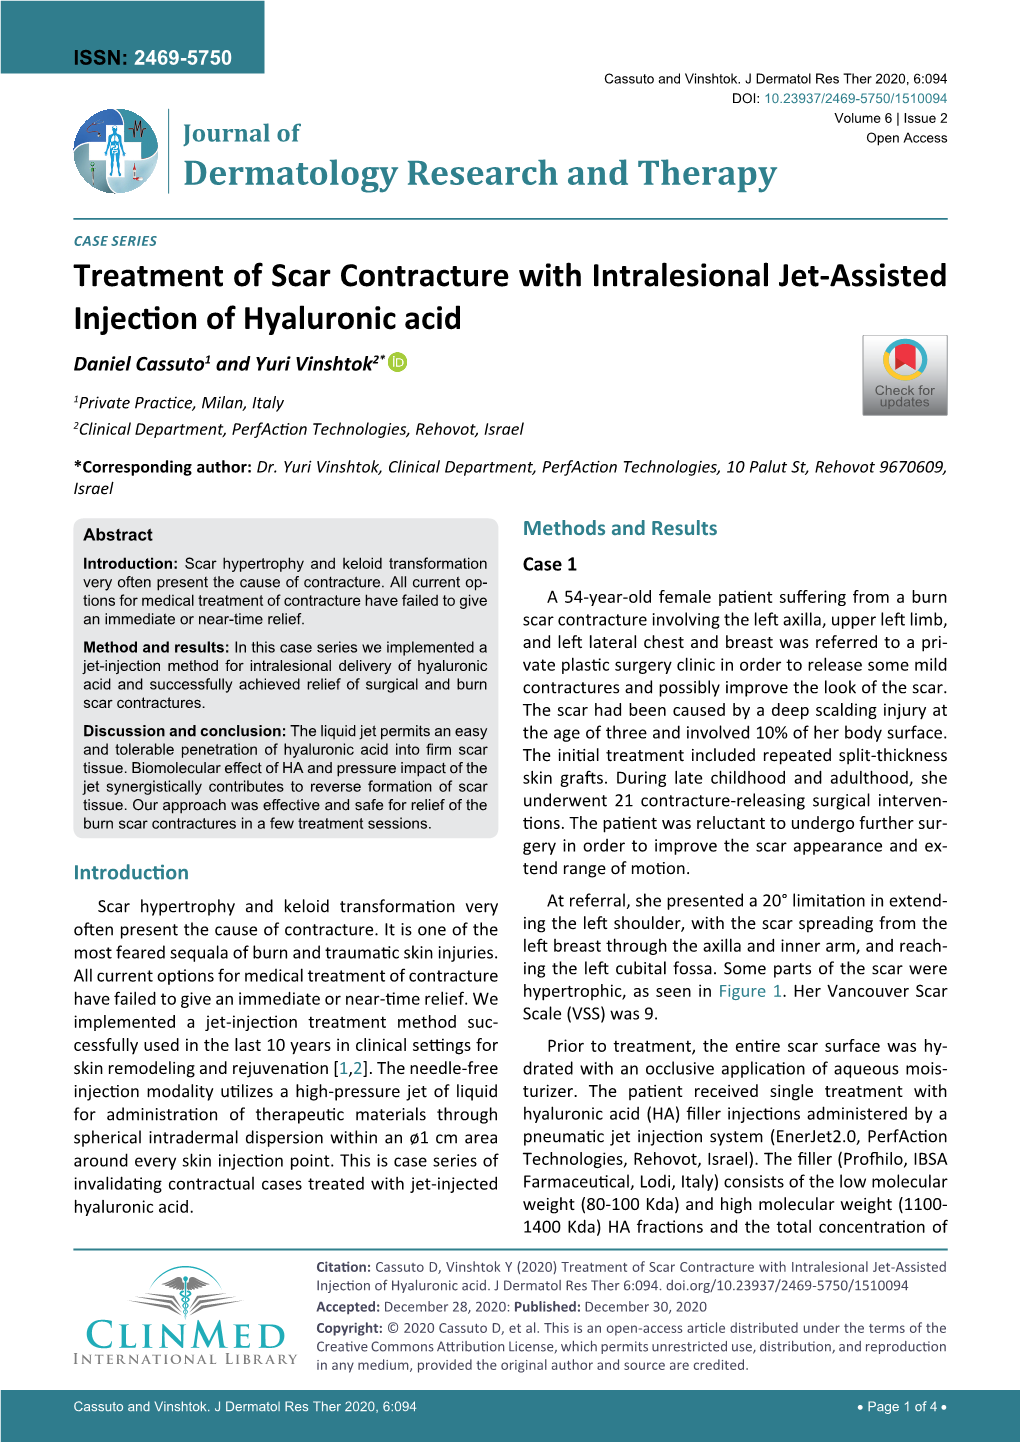 Treatment of Scar Contracture with Intralesional Jet-Assisted Injection